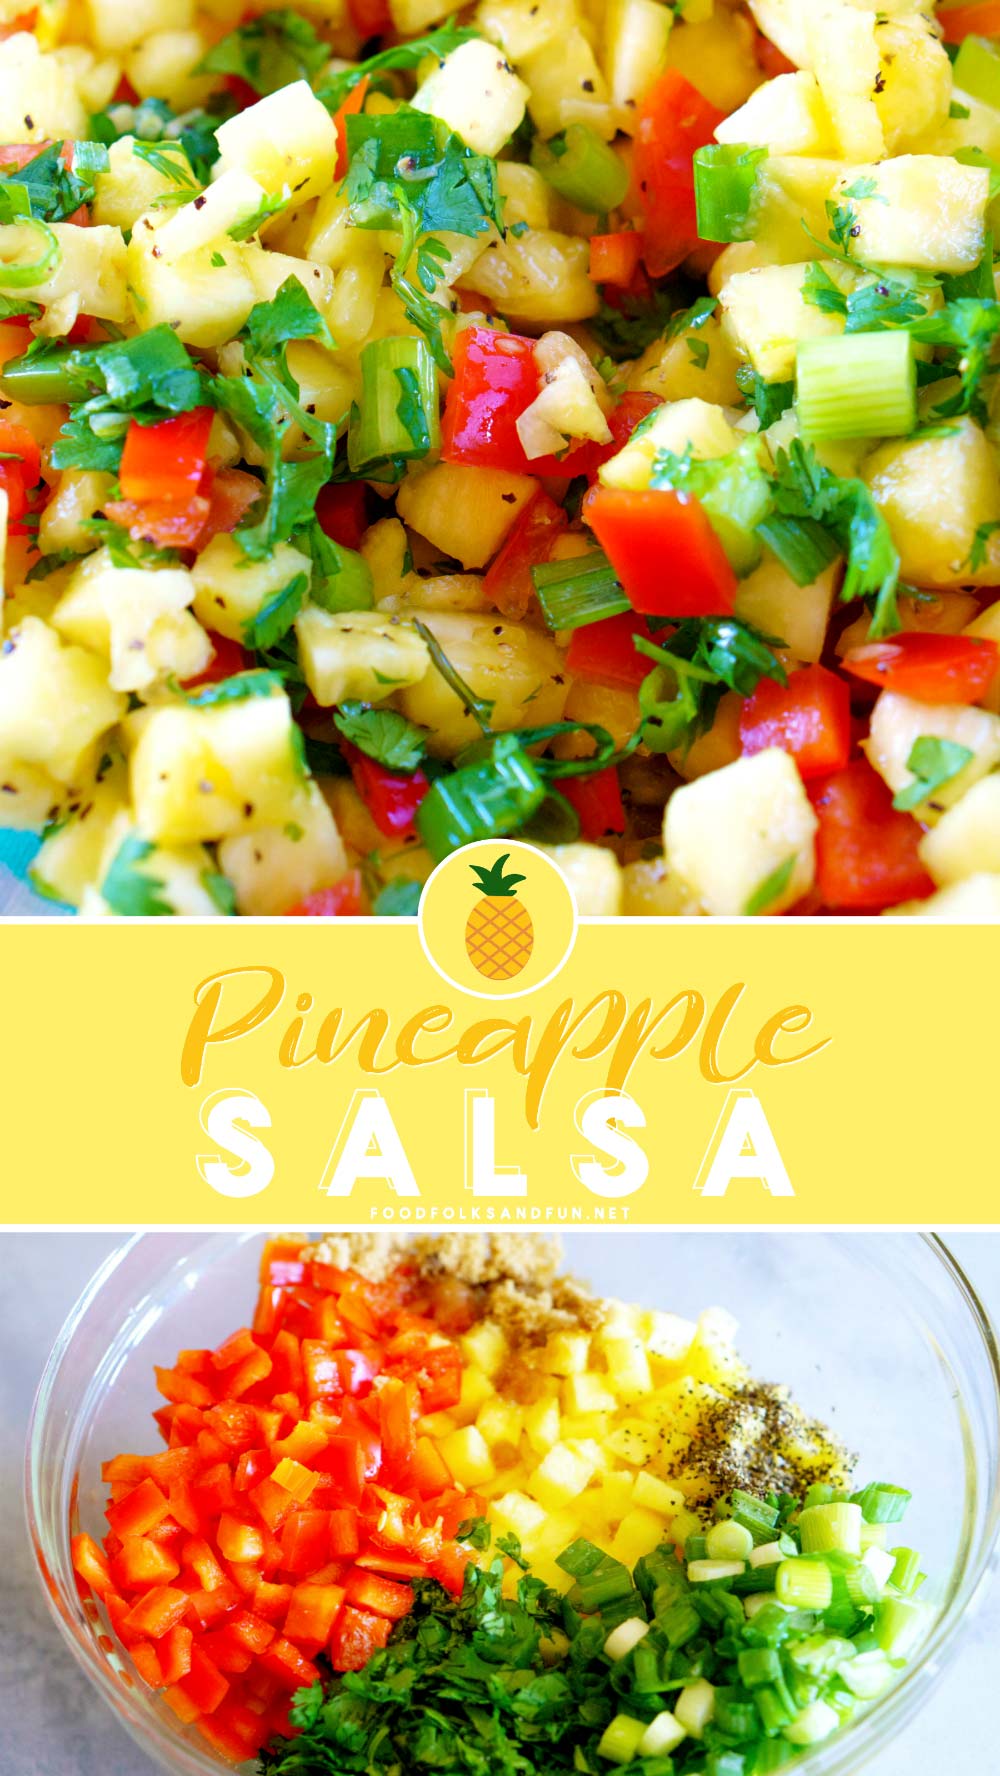 This easy Pineapple Salsa recipe is beautifully colorful, sweet, and versatile! I use it as a side dish, an appetizer, or a topping on tacos, chicken, pork, or even steak. Plus it’s great for canning so you can enjoy it year-round! #salsa #pineapple #pineapplesalsa #appetizer #pineapplerecipe #foodfolksandfun via @foodfolksandfun